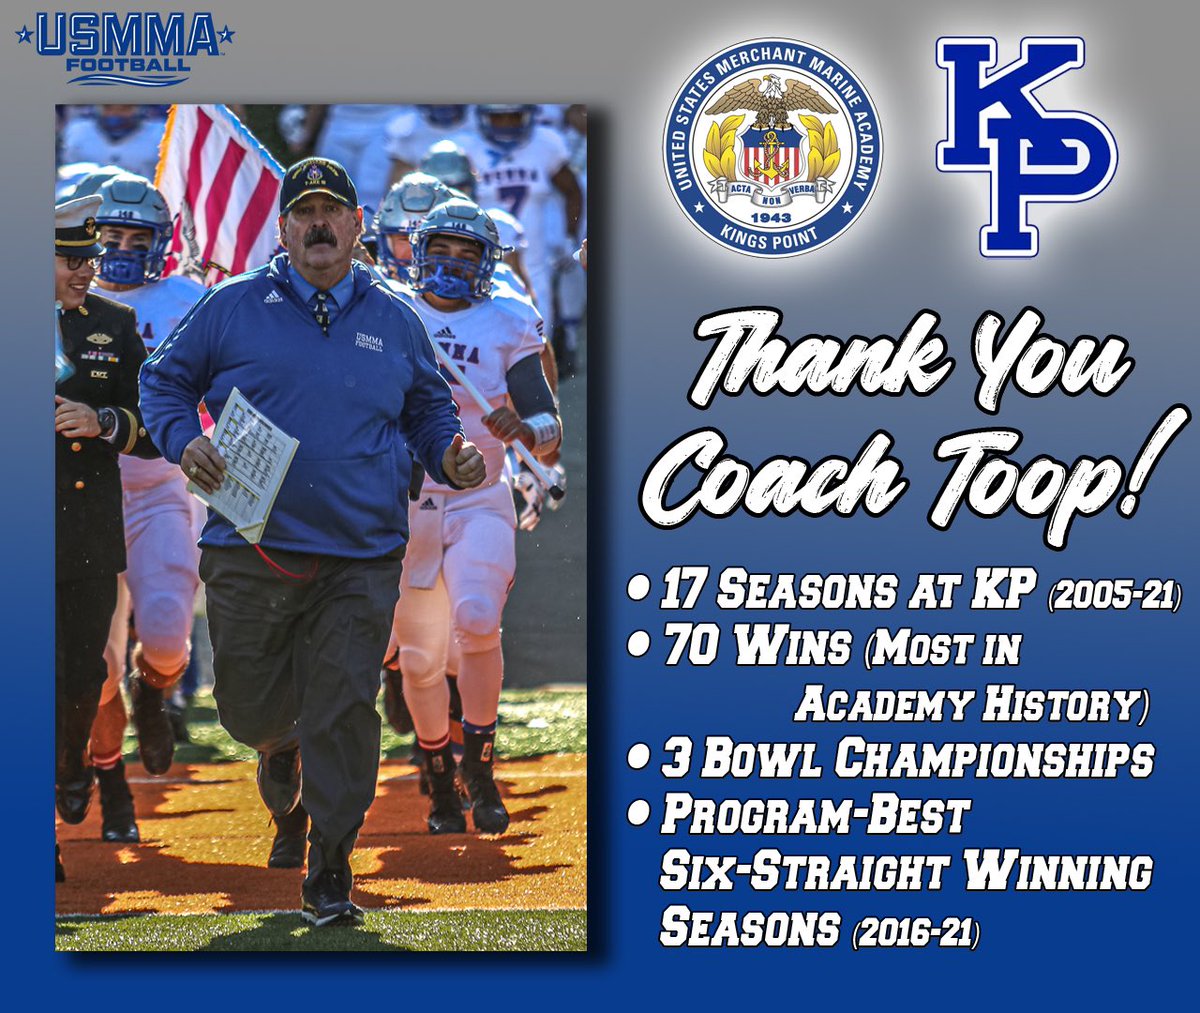 Today is @CoachToop’s last day working at KP. It’s been quite the ride! Thank you for always giving it your all and setting a level of excellence for Kings Pointers new and old both on the field and in the classrooms. You will be missed! Enjoy retirement! #d3fb #OURAcademy